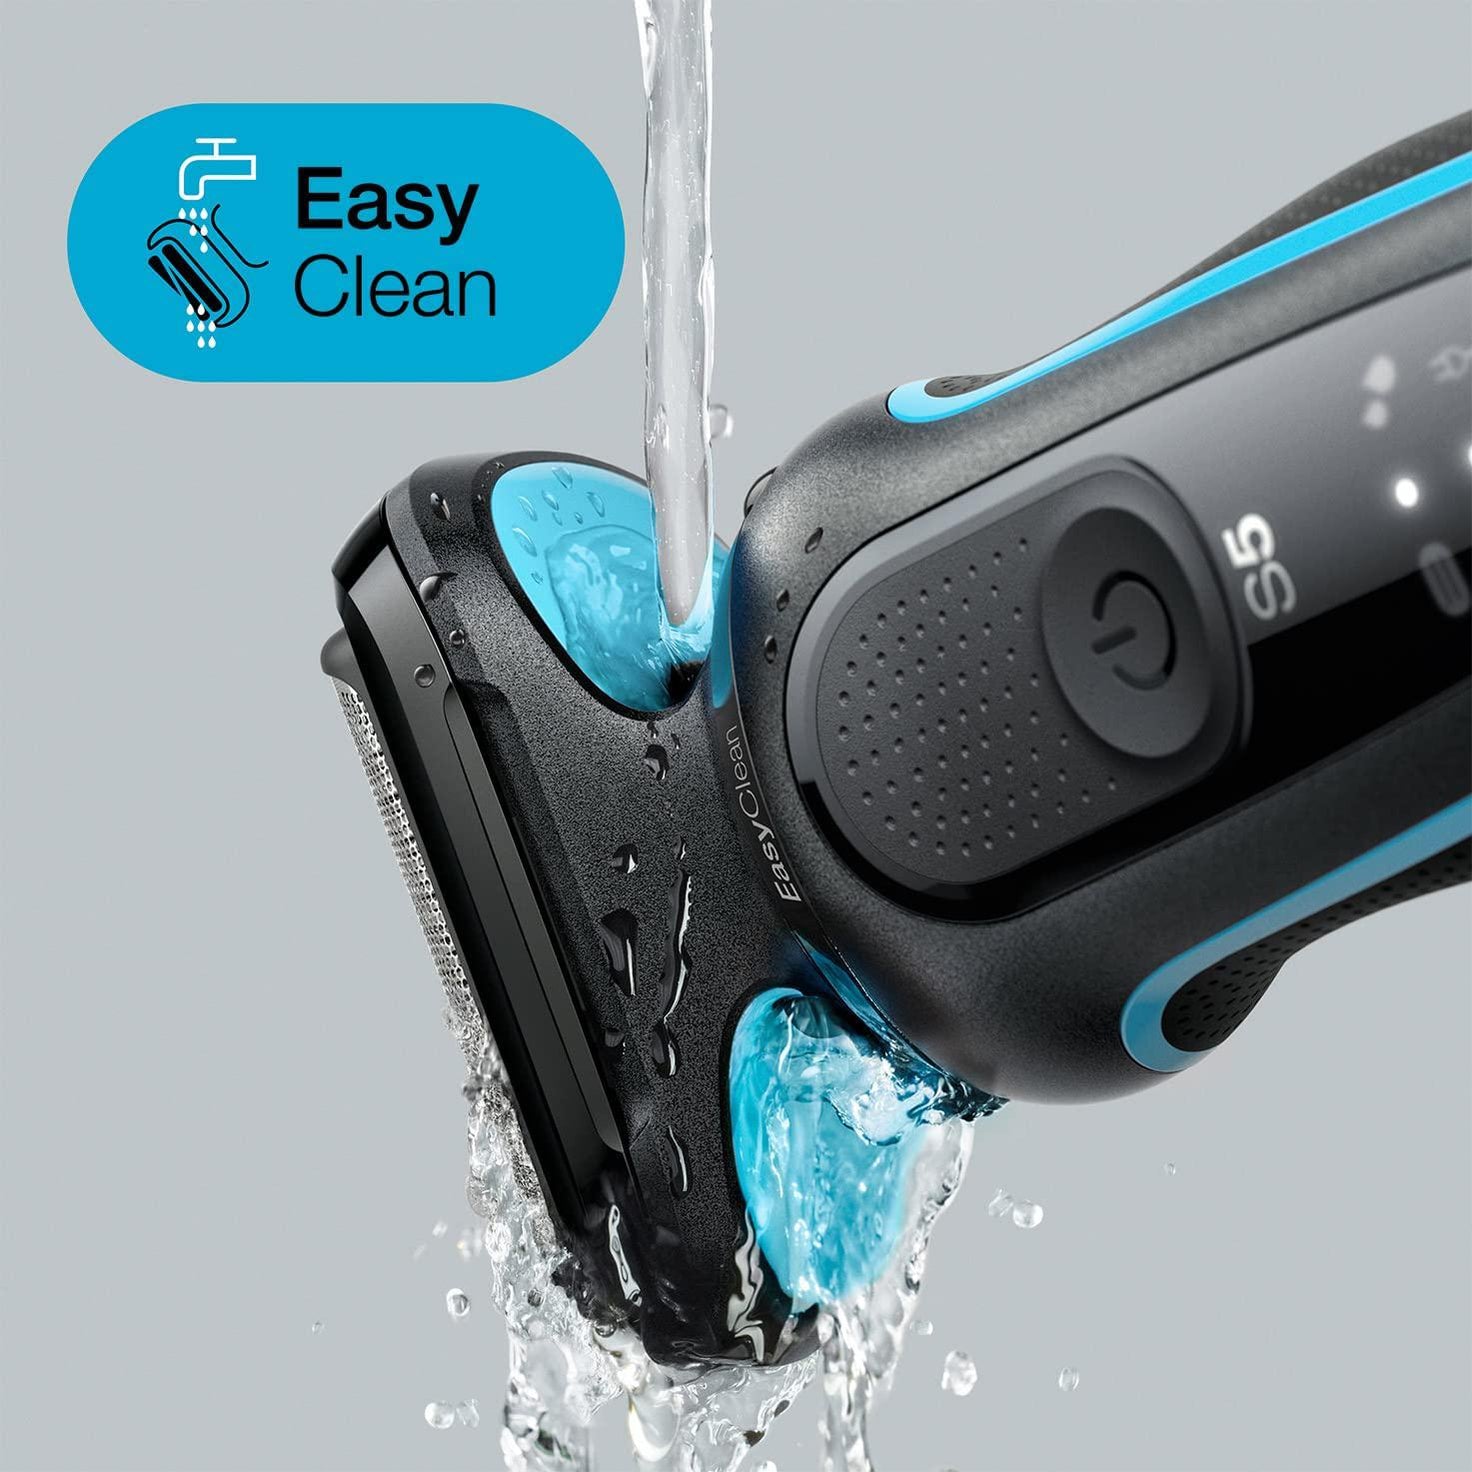 Braun Series 5 50-M1000s Wet and Dry Foil Shaver - Black & Blue - Healthxpress.ie